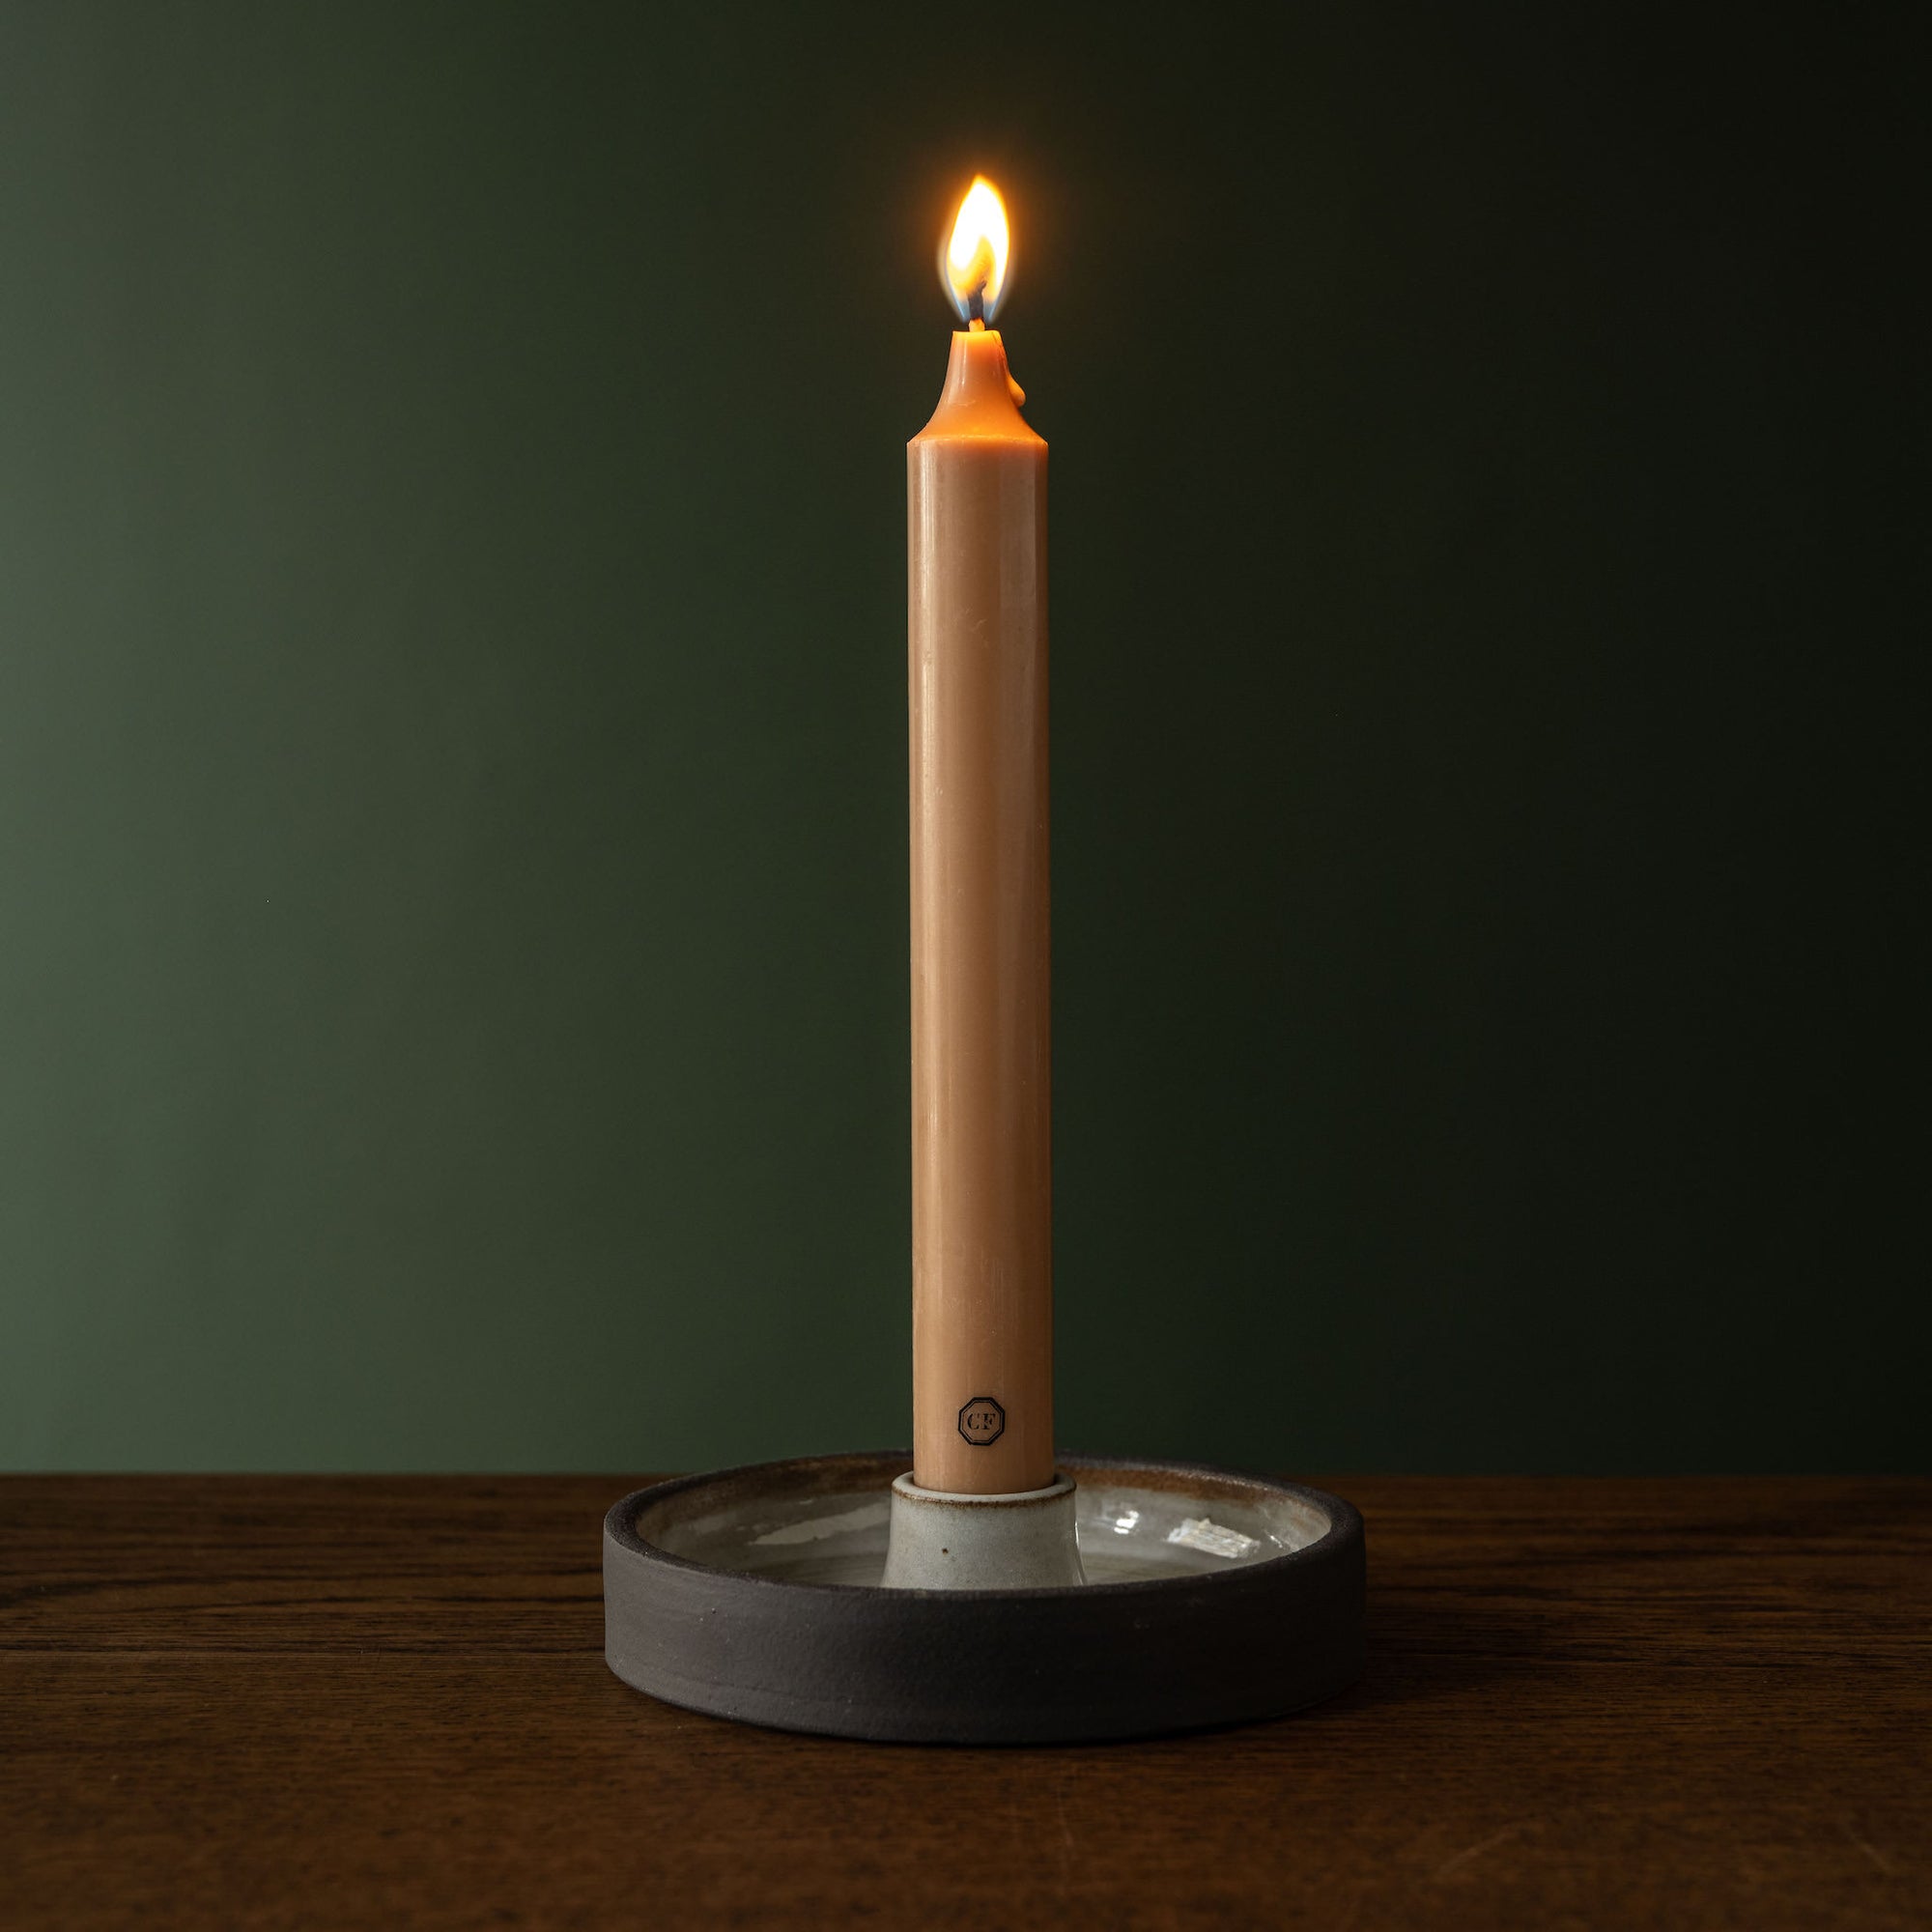 Carriere Freres Cedar Taper Candle in candle holder